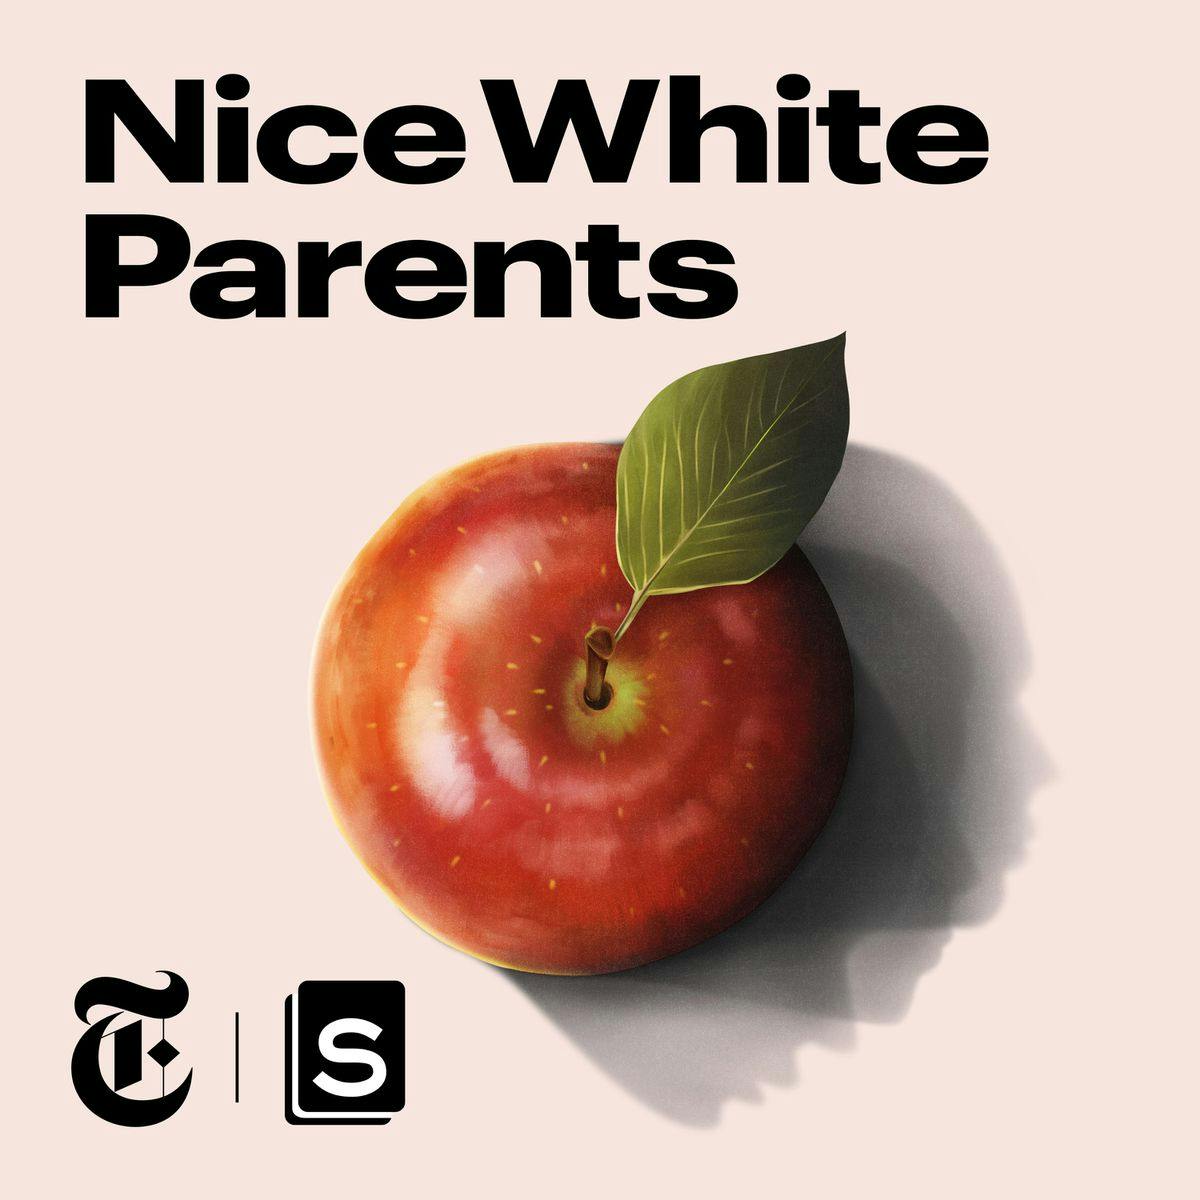 The media cover for “Nice White Parents” by Chana Joffe-Walt/New York Times